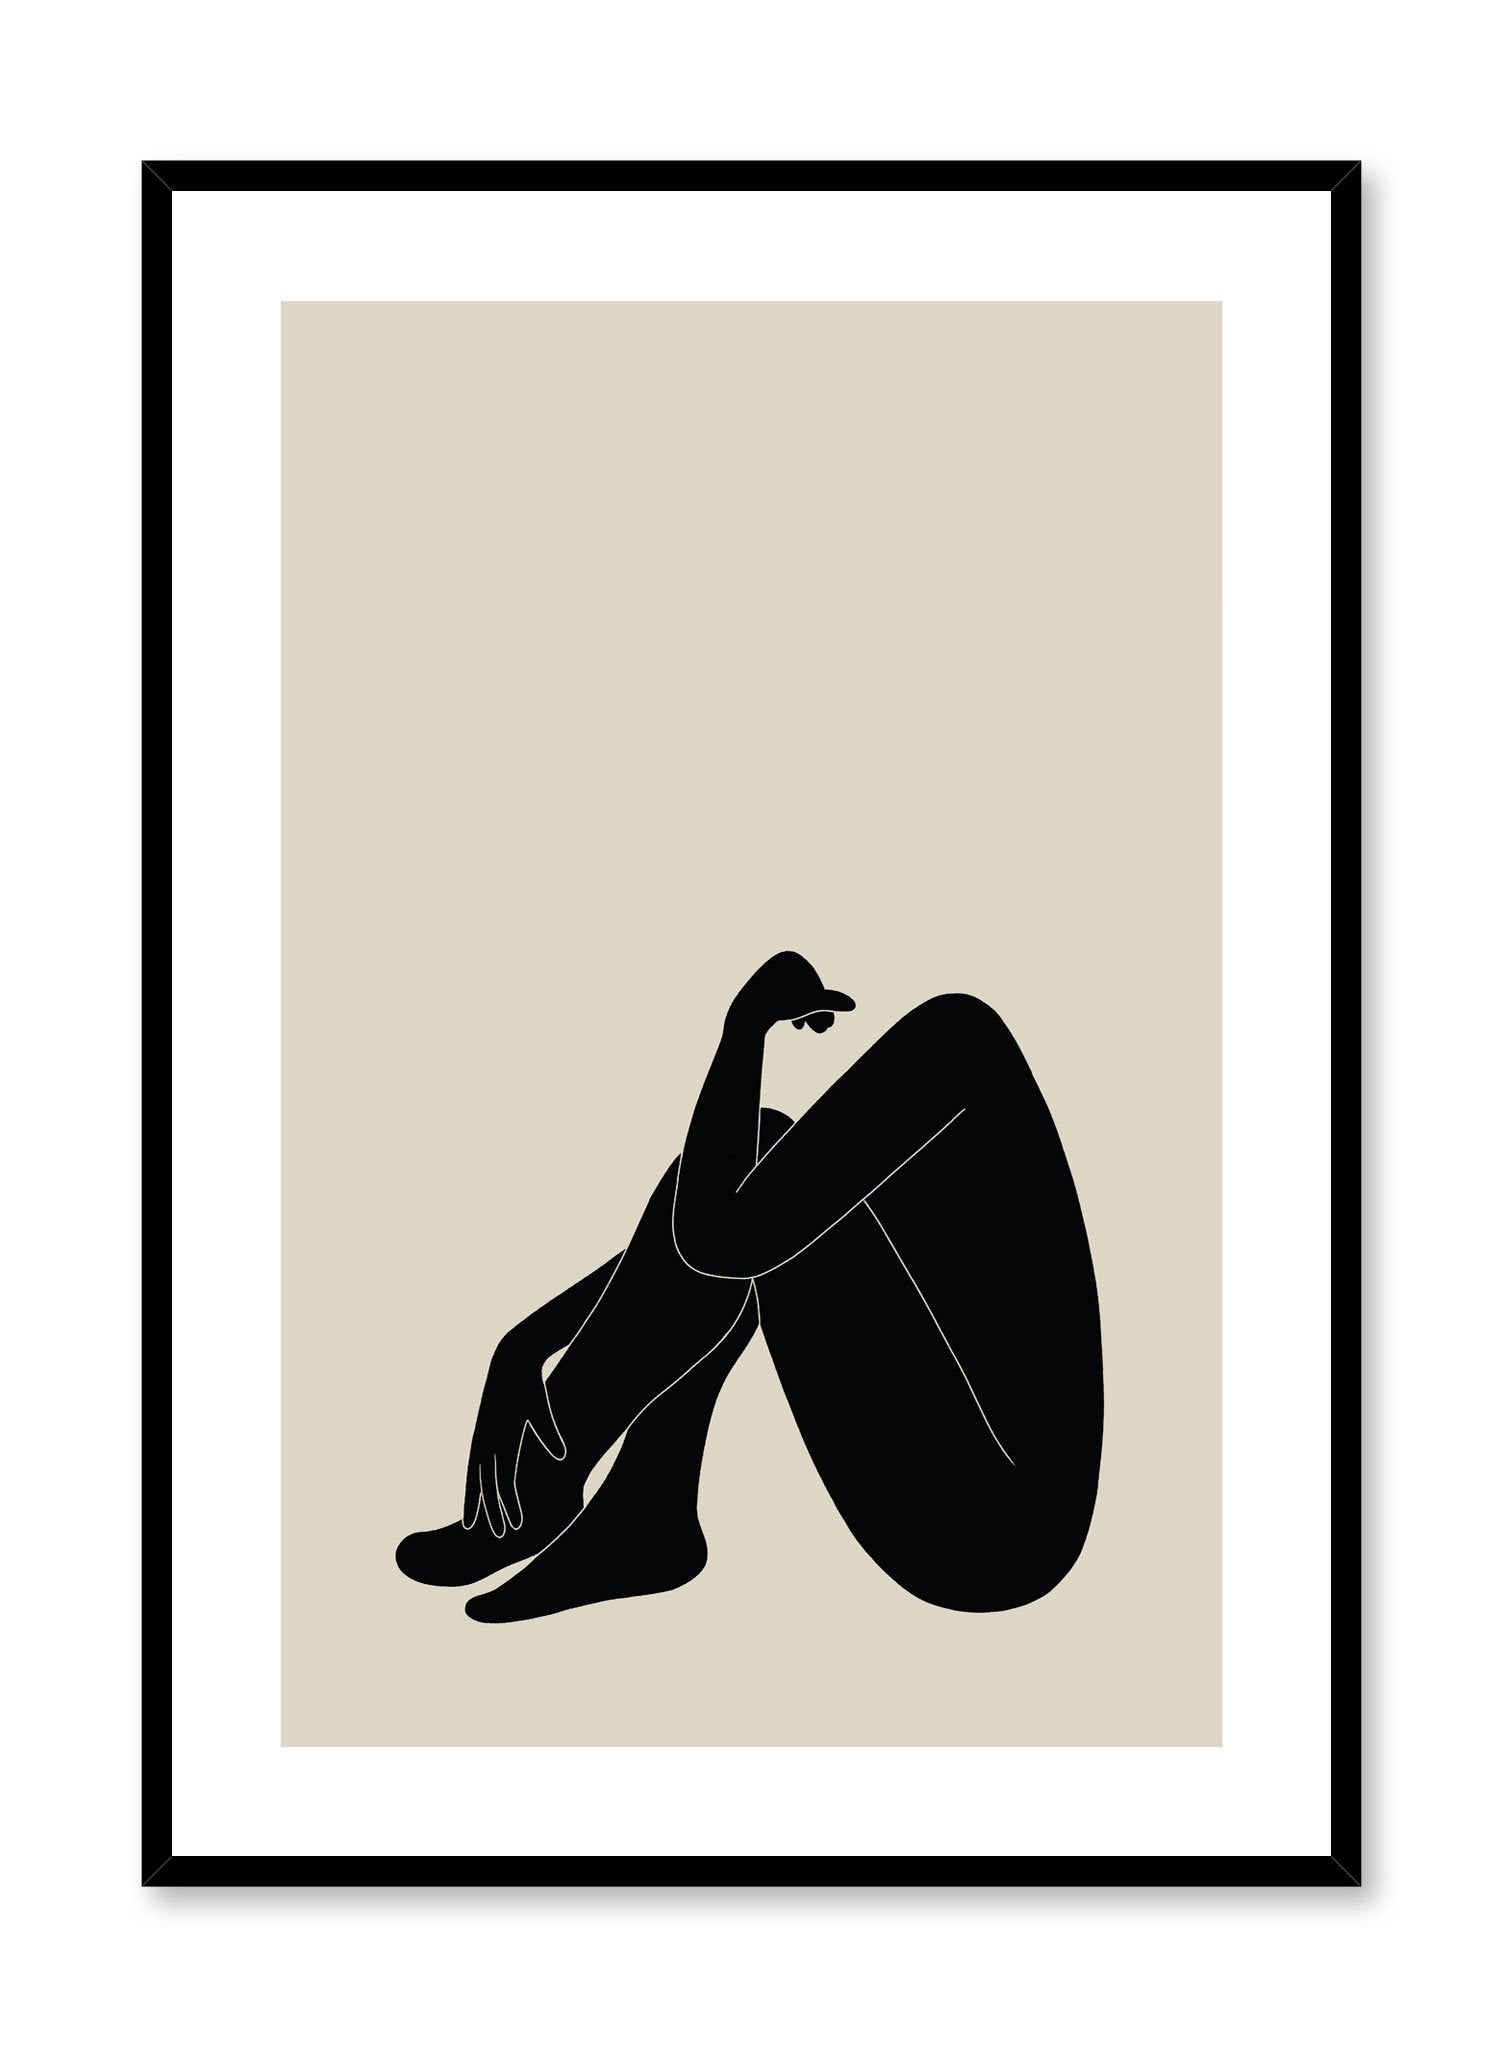 Minimalist design poster by Opposite Wall with abstract woman sitting in contemplation